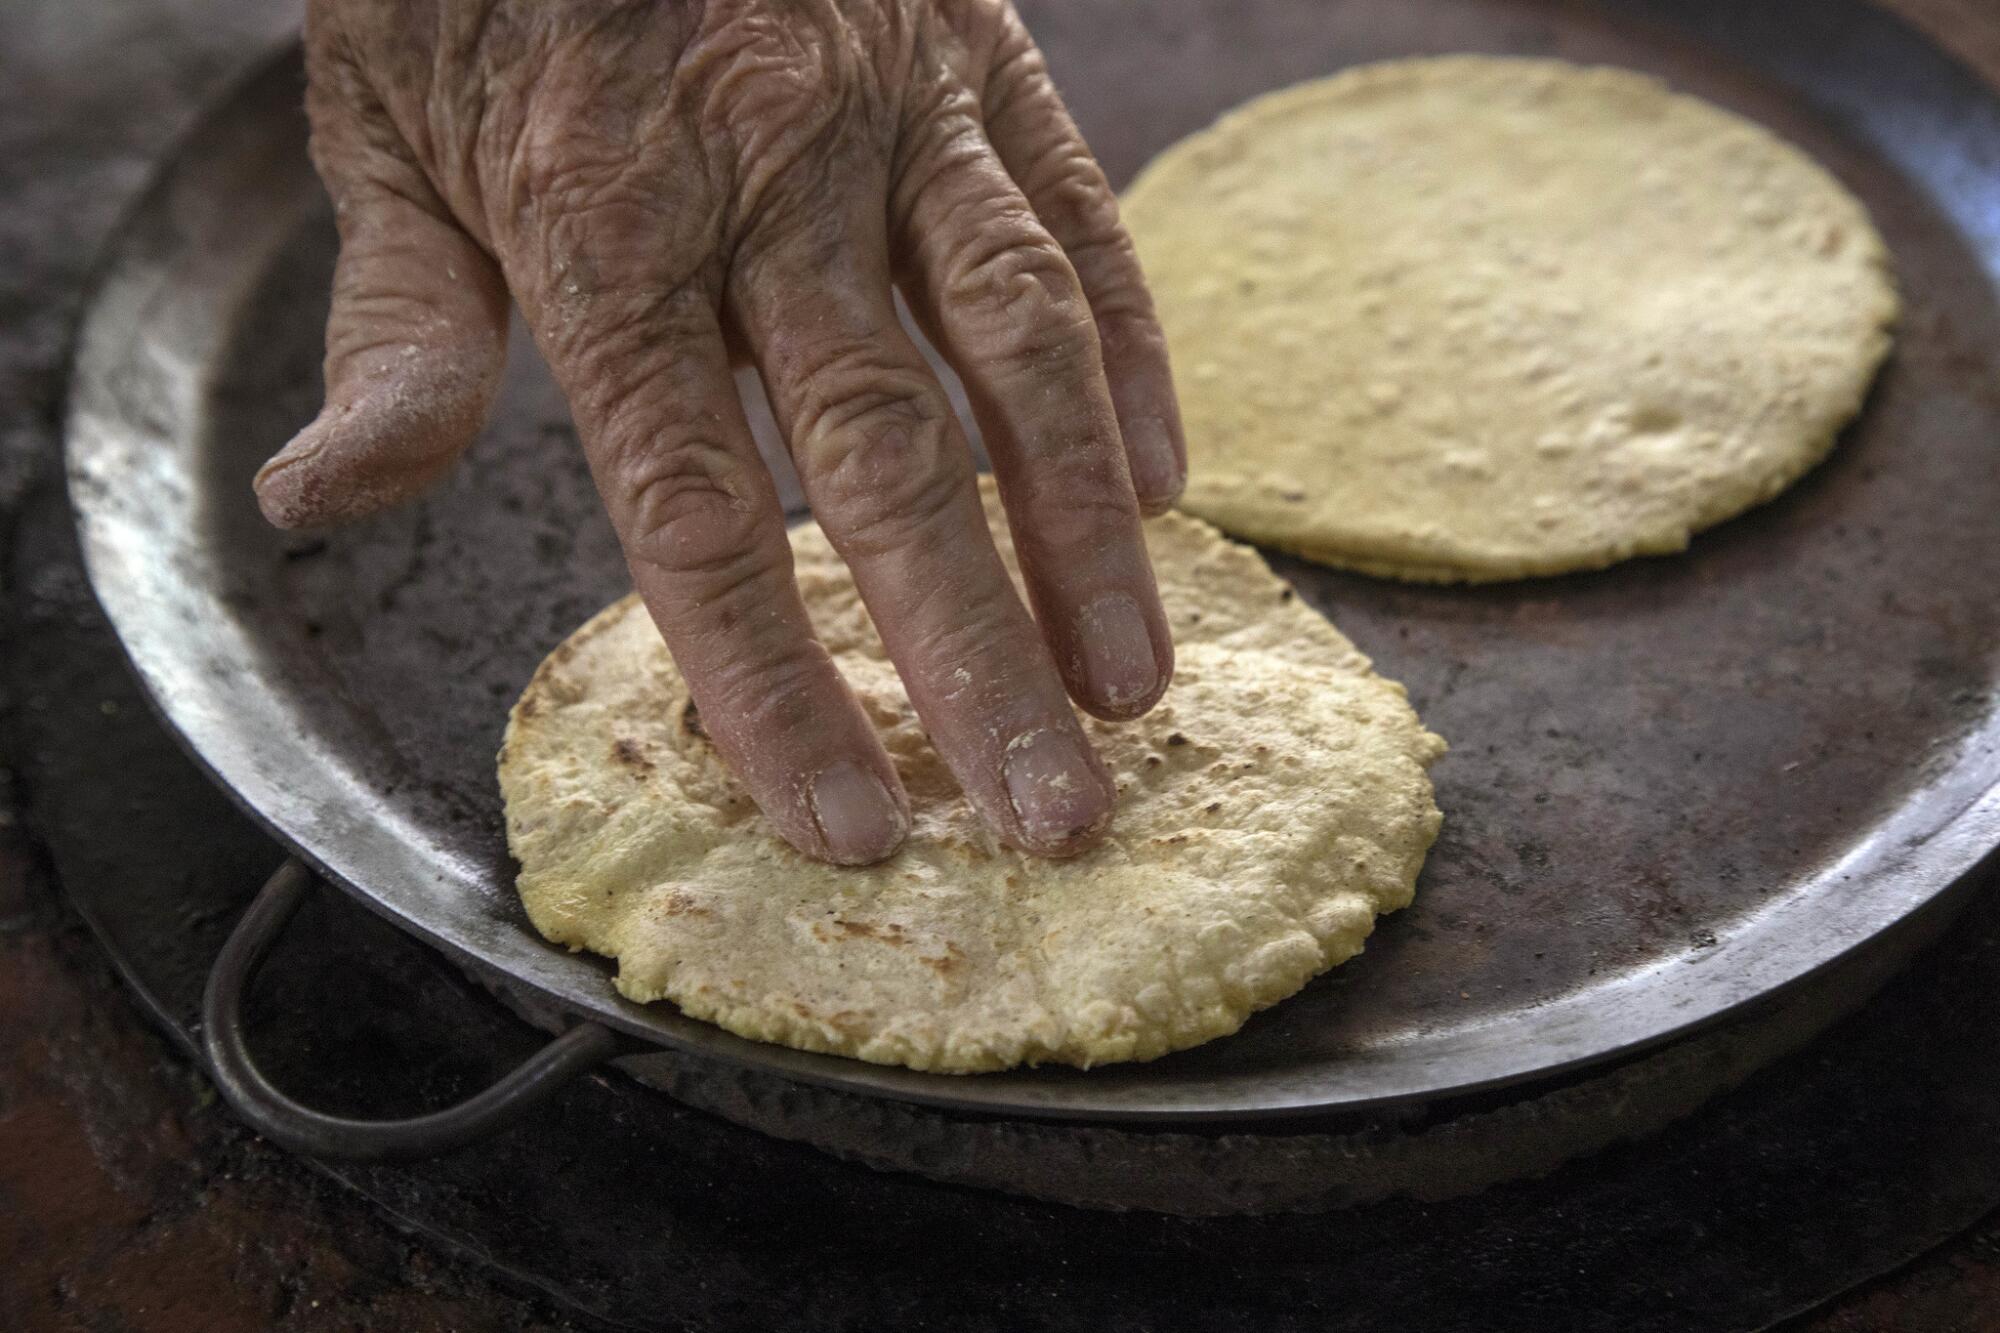 A wrinkled hand presses a tortilla on a comal.